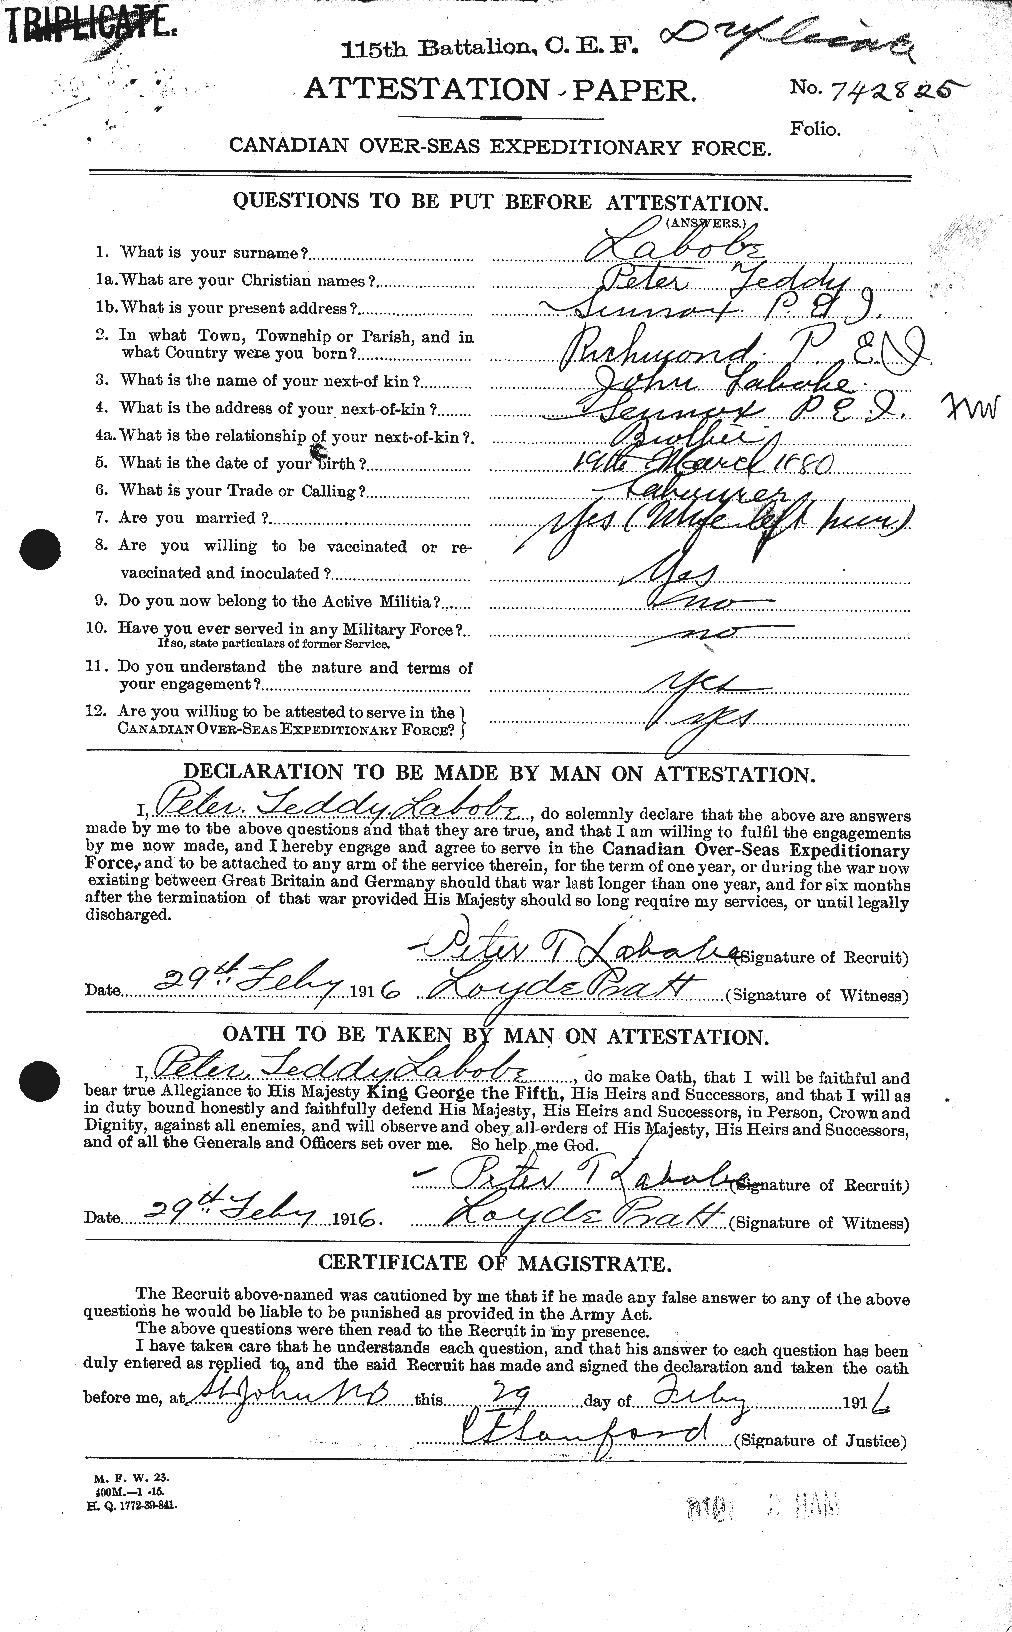 Personnel Records of the First World War - CEF 441761a